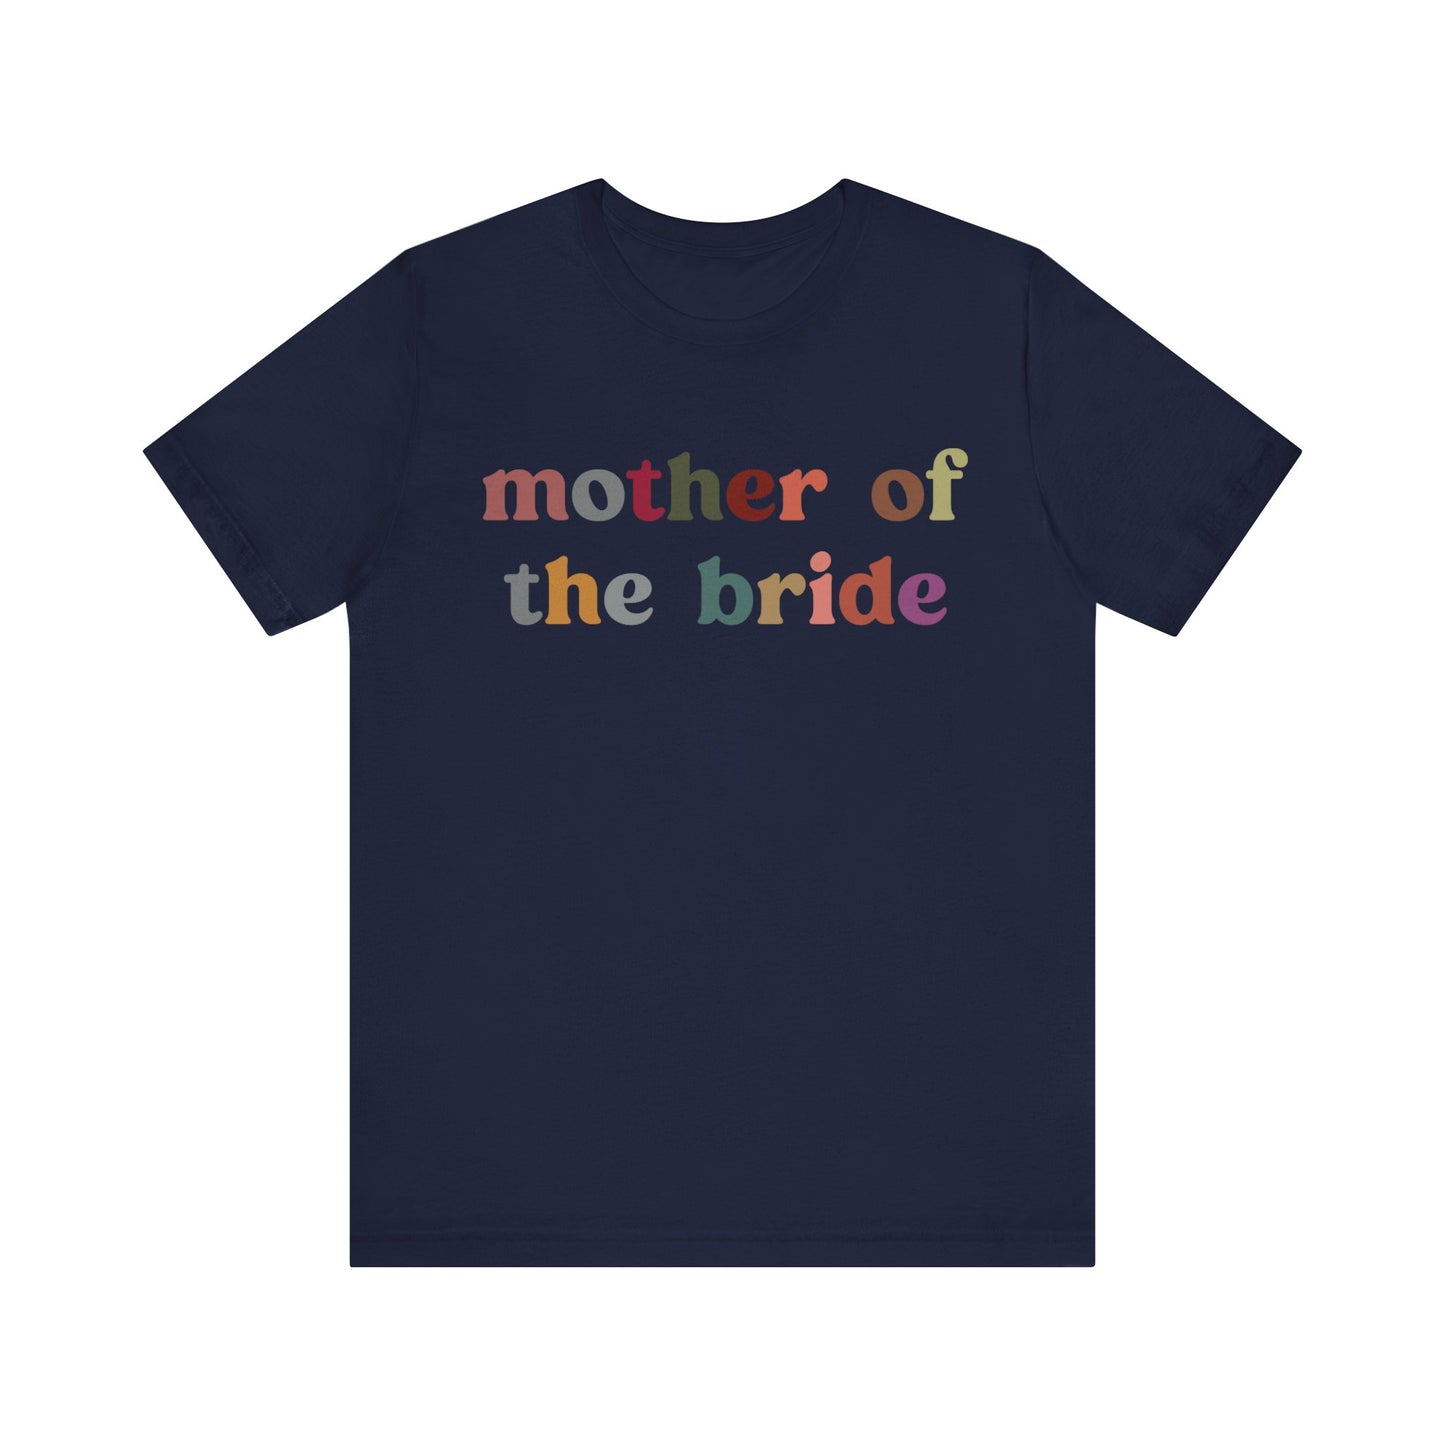 Mother of the Bride Shirt, Cute Wedding Gift from Daughter, Engagement Gift, Retro Wedding Gift for Mom, Bridal Party Shirt for Mom, T1145